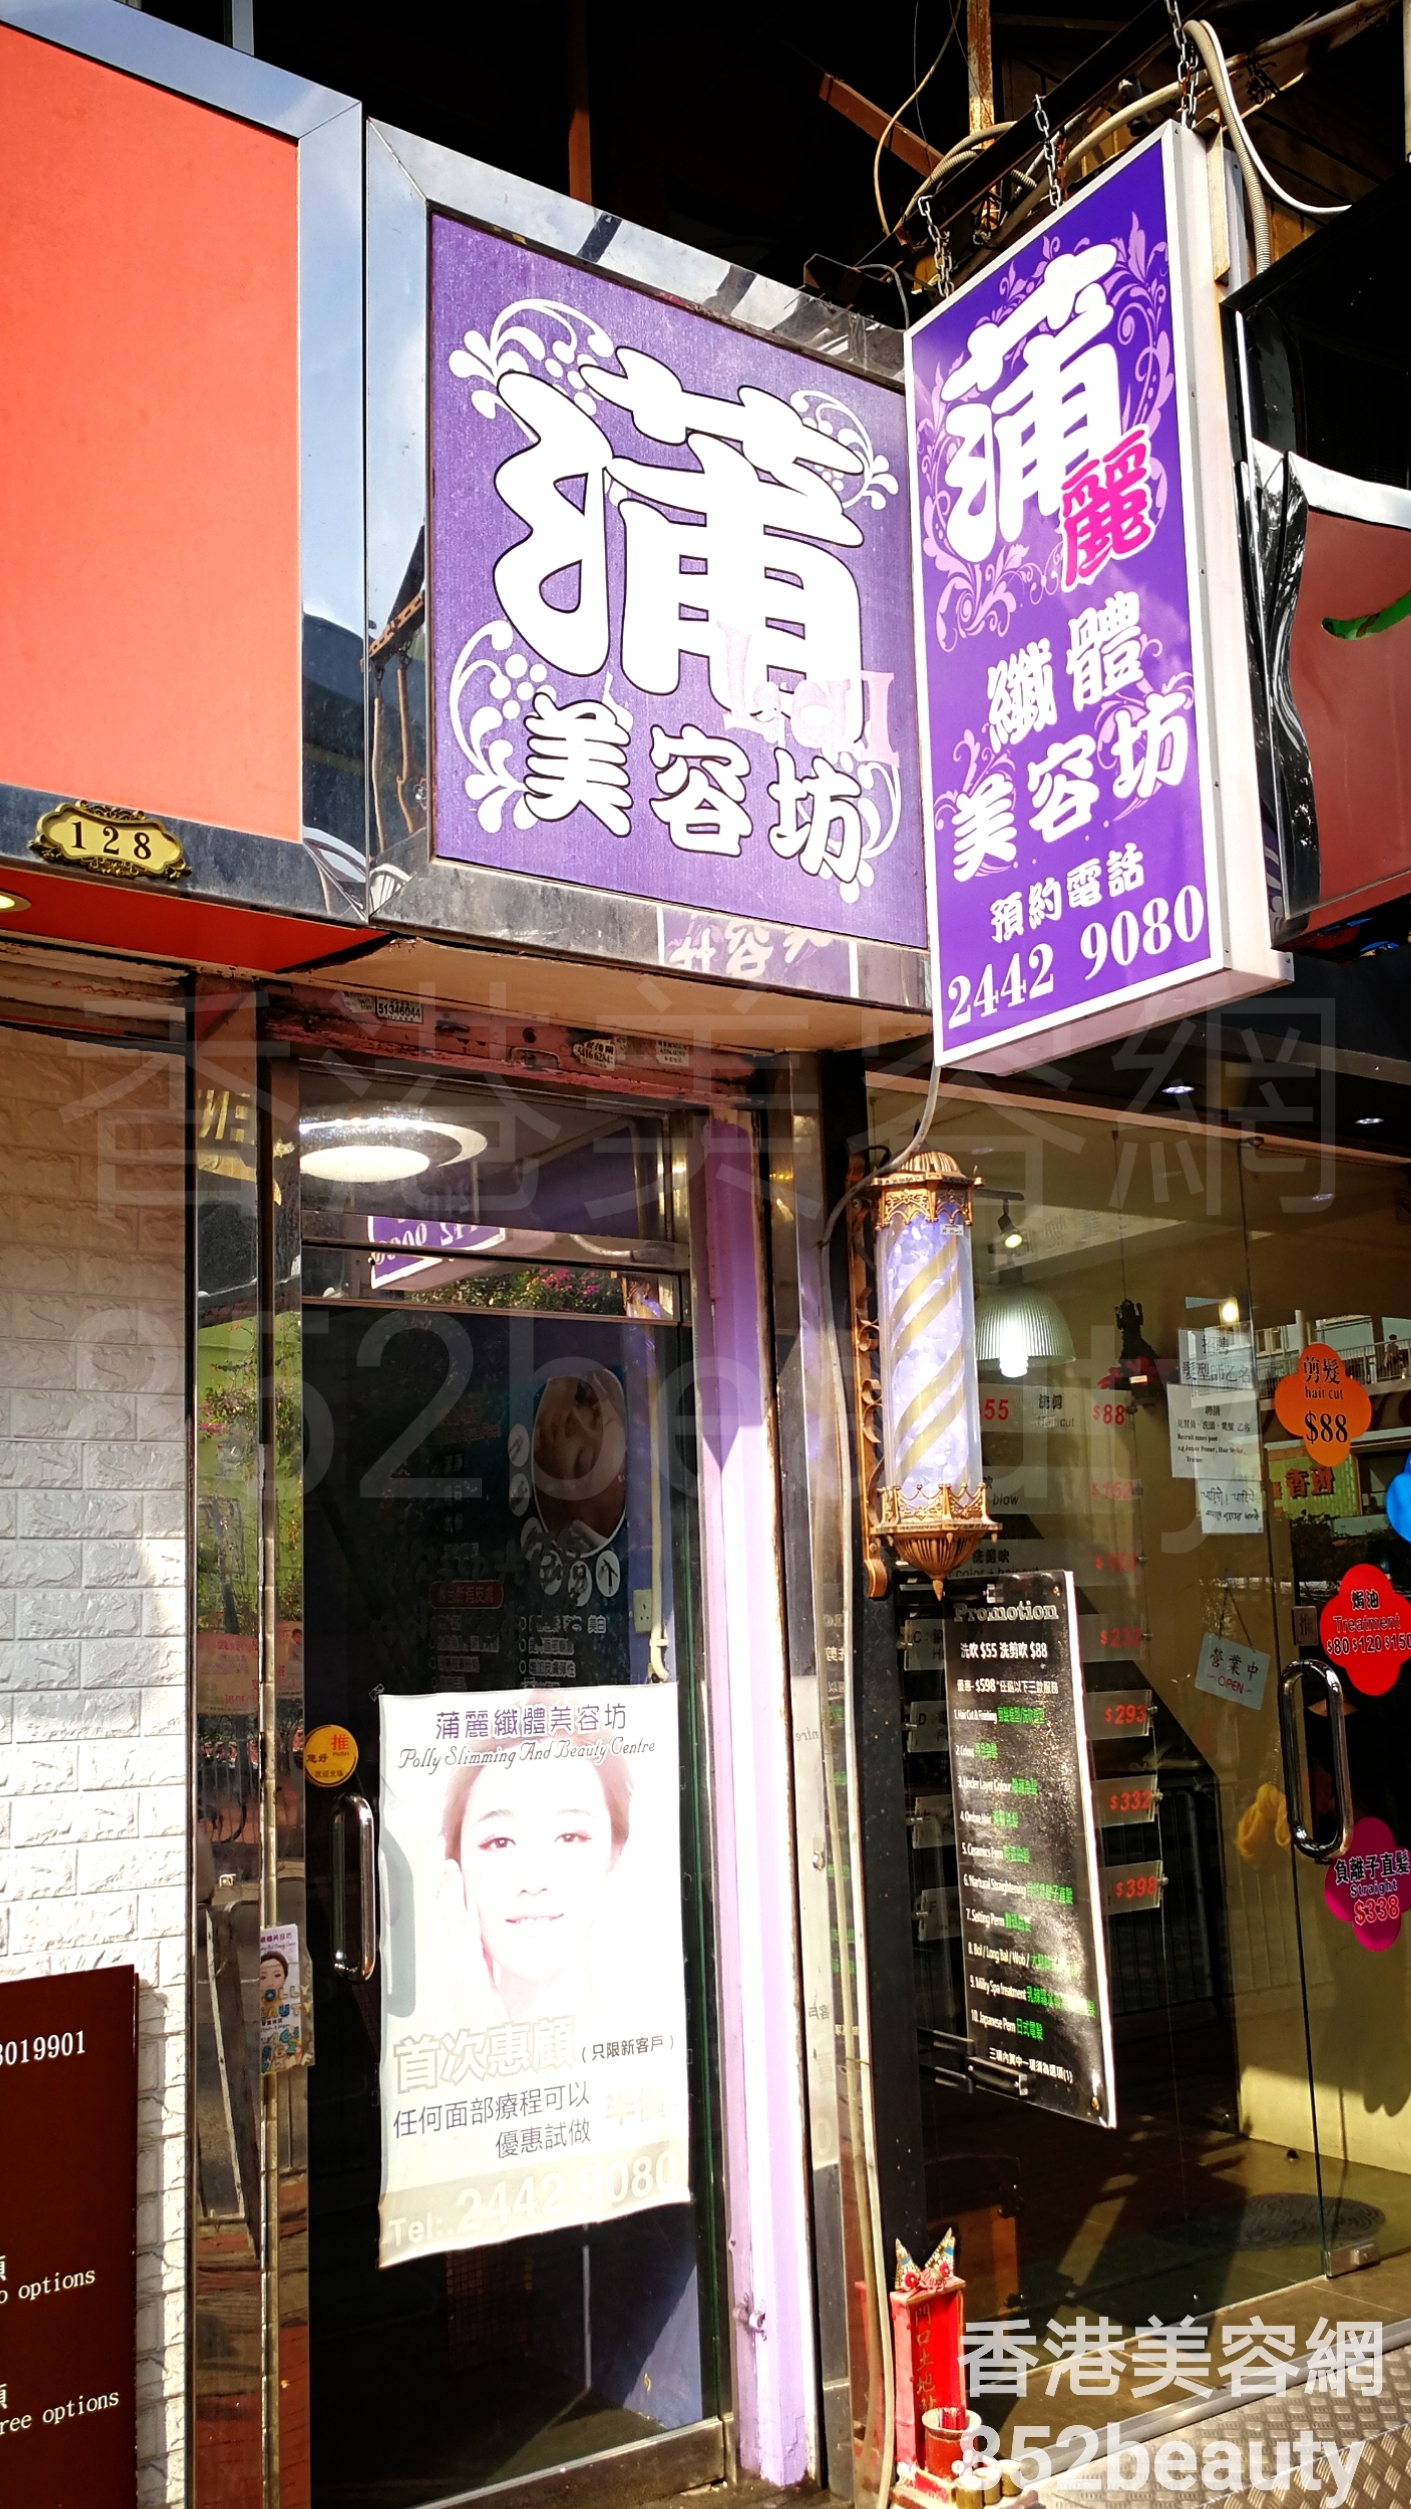 Hand and foot care: 蒲麗纖體美容坊